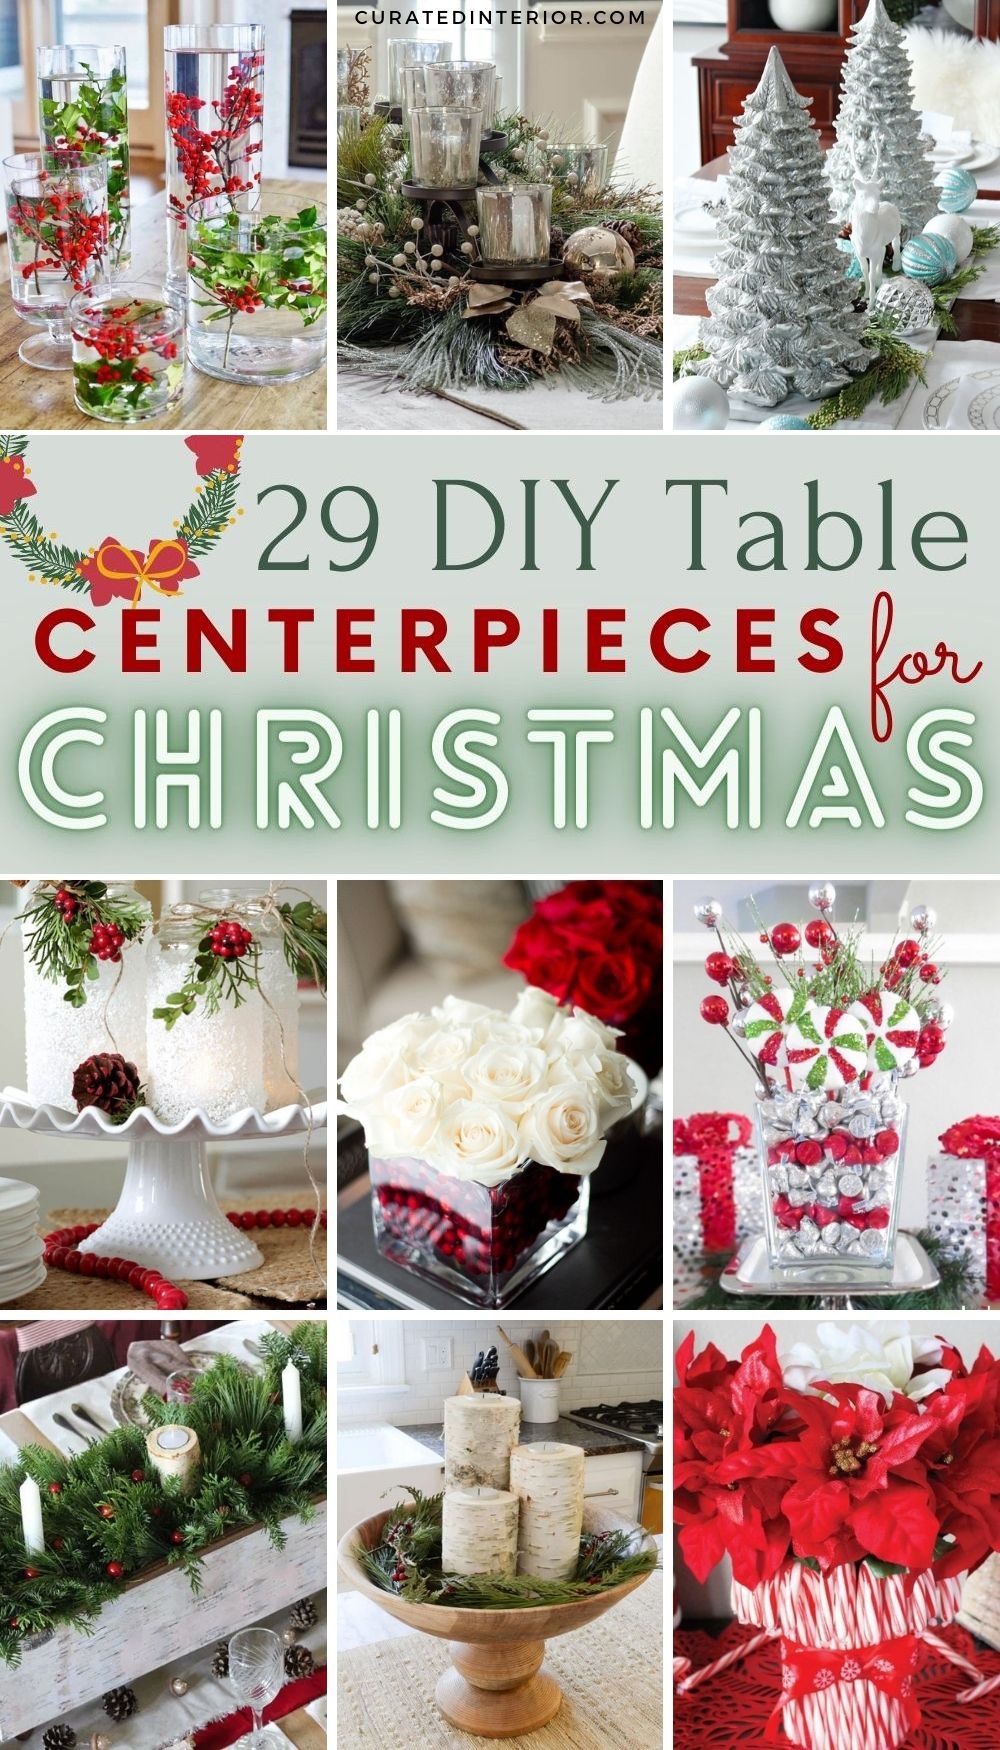 29 DIY Table Centerpieces for Christmas